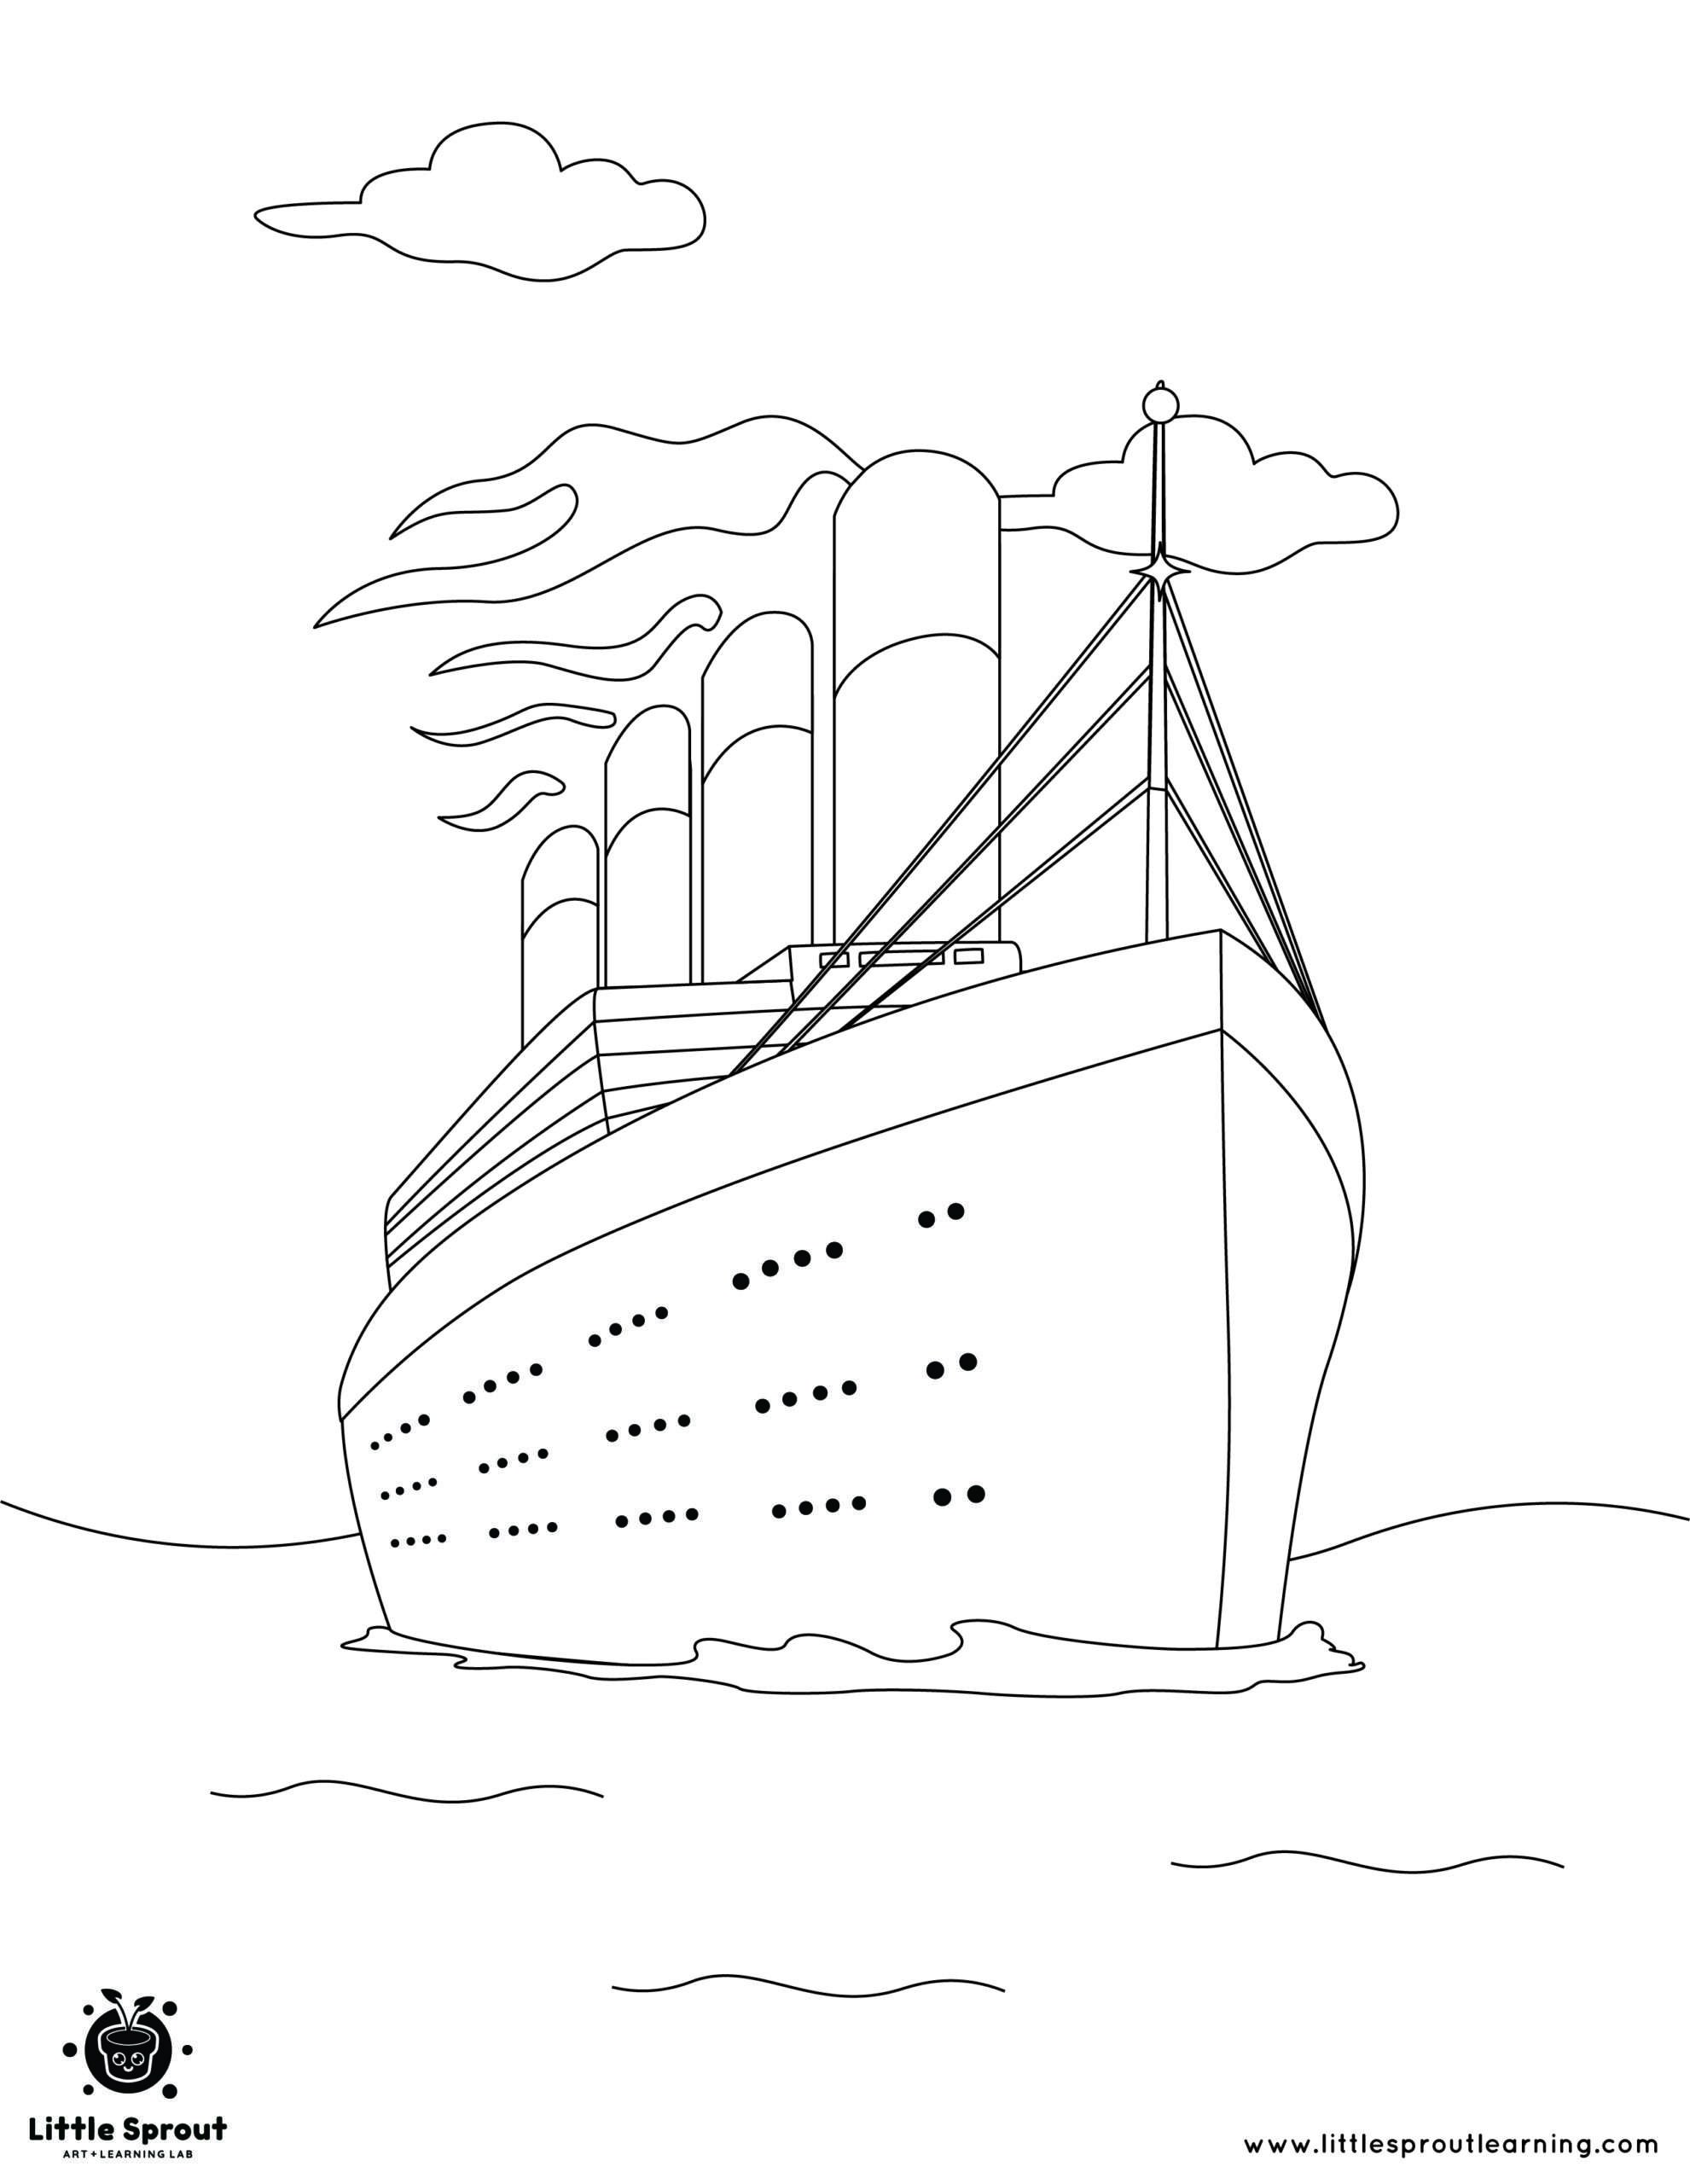 Titanic Coloring Page Illustrationg Sailing Across the Sea